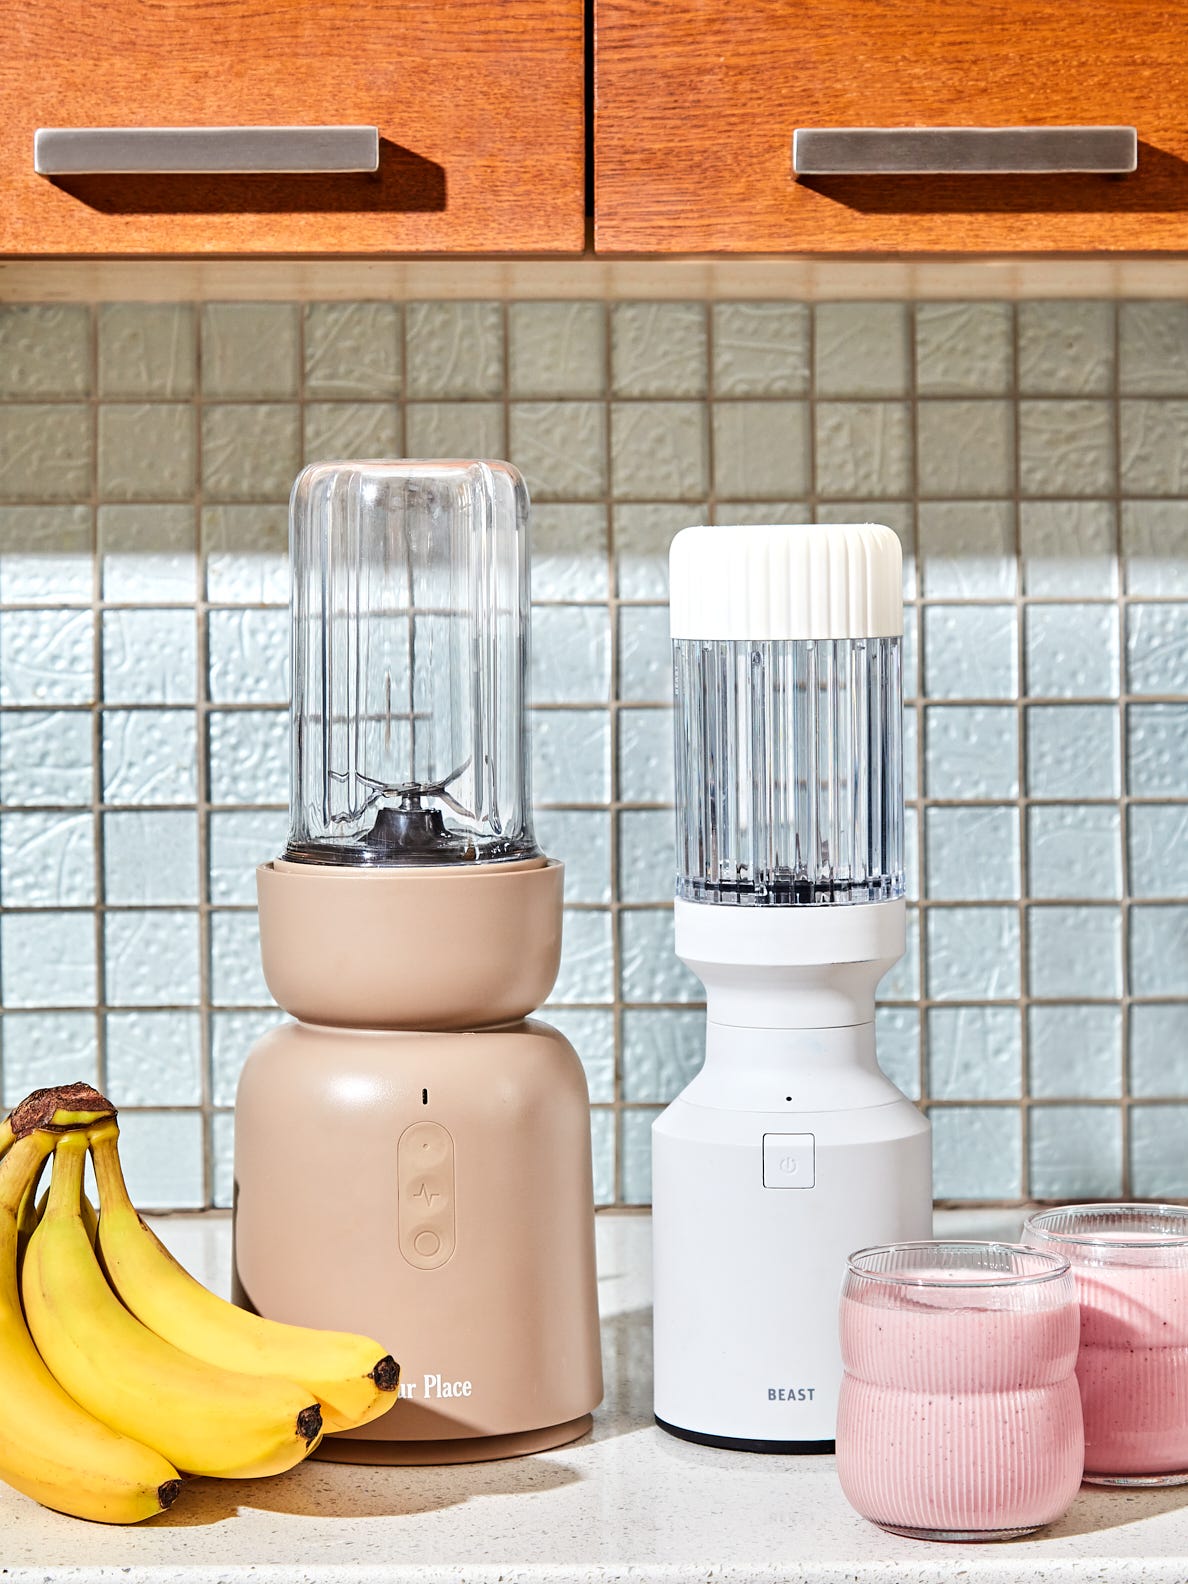 Beast vs. Our Place: Which New Mini Blender Is Better?